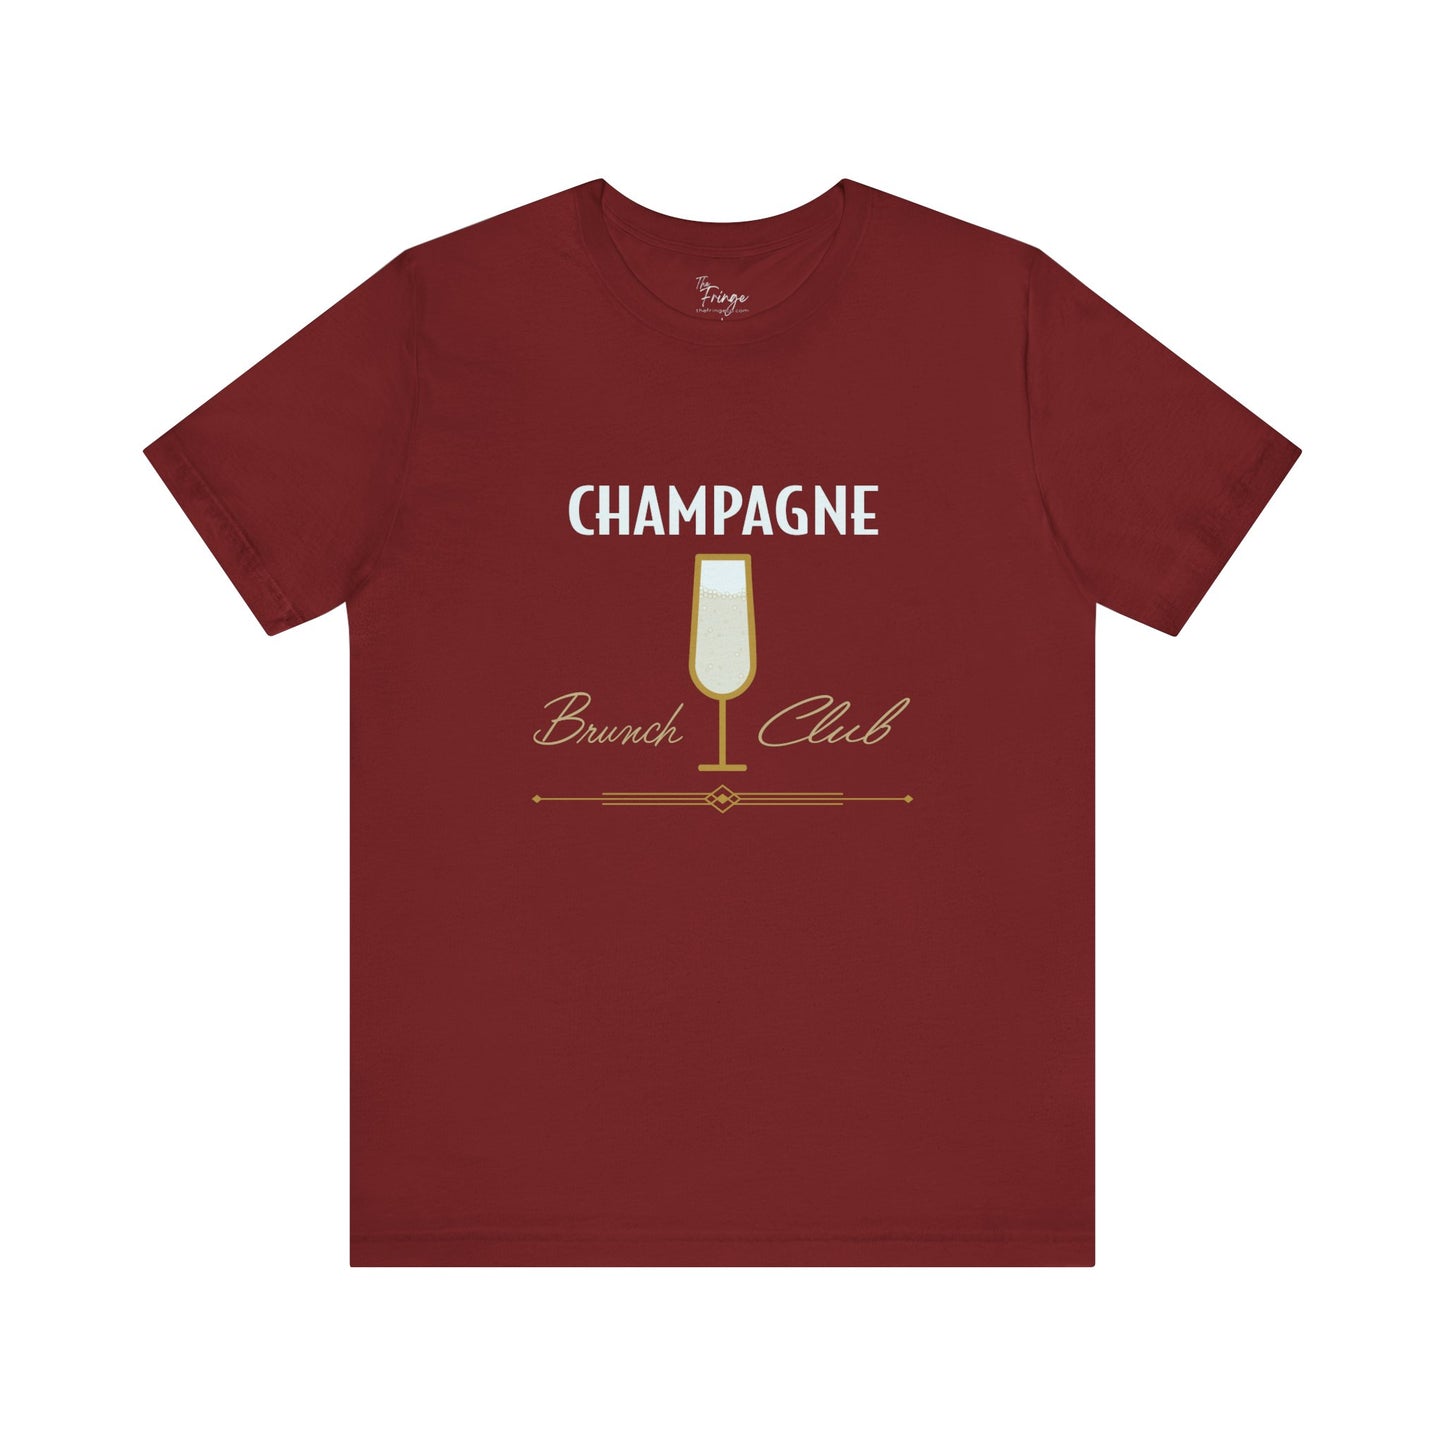 Champagne Brunch Club Graphic Tee | Girls Trip T-shirt | Bottomless Mimosa Girls | Gift for Friend